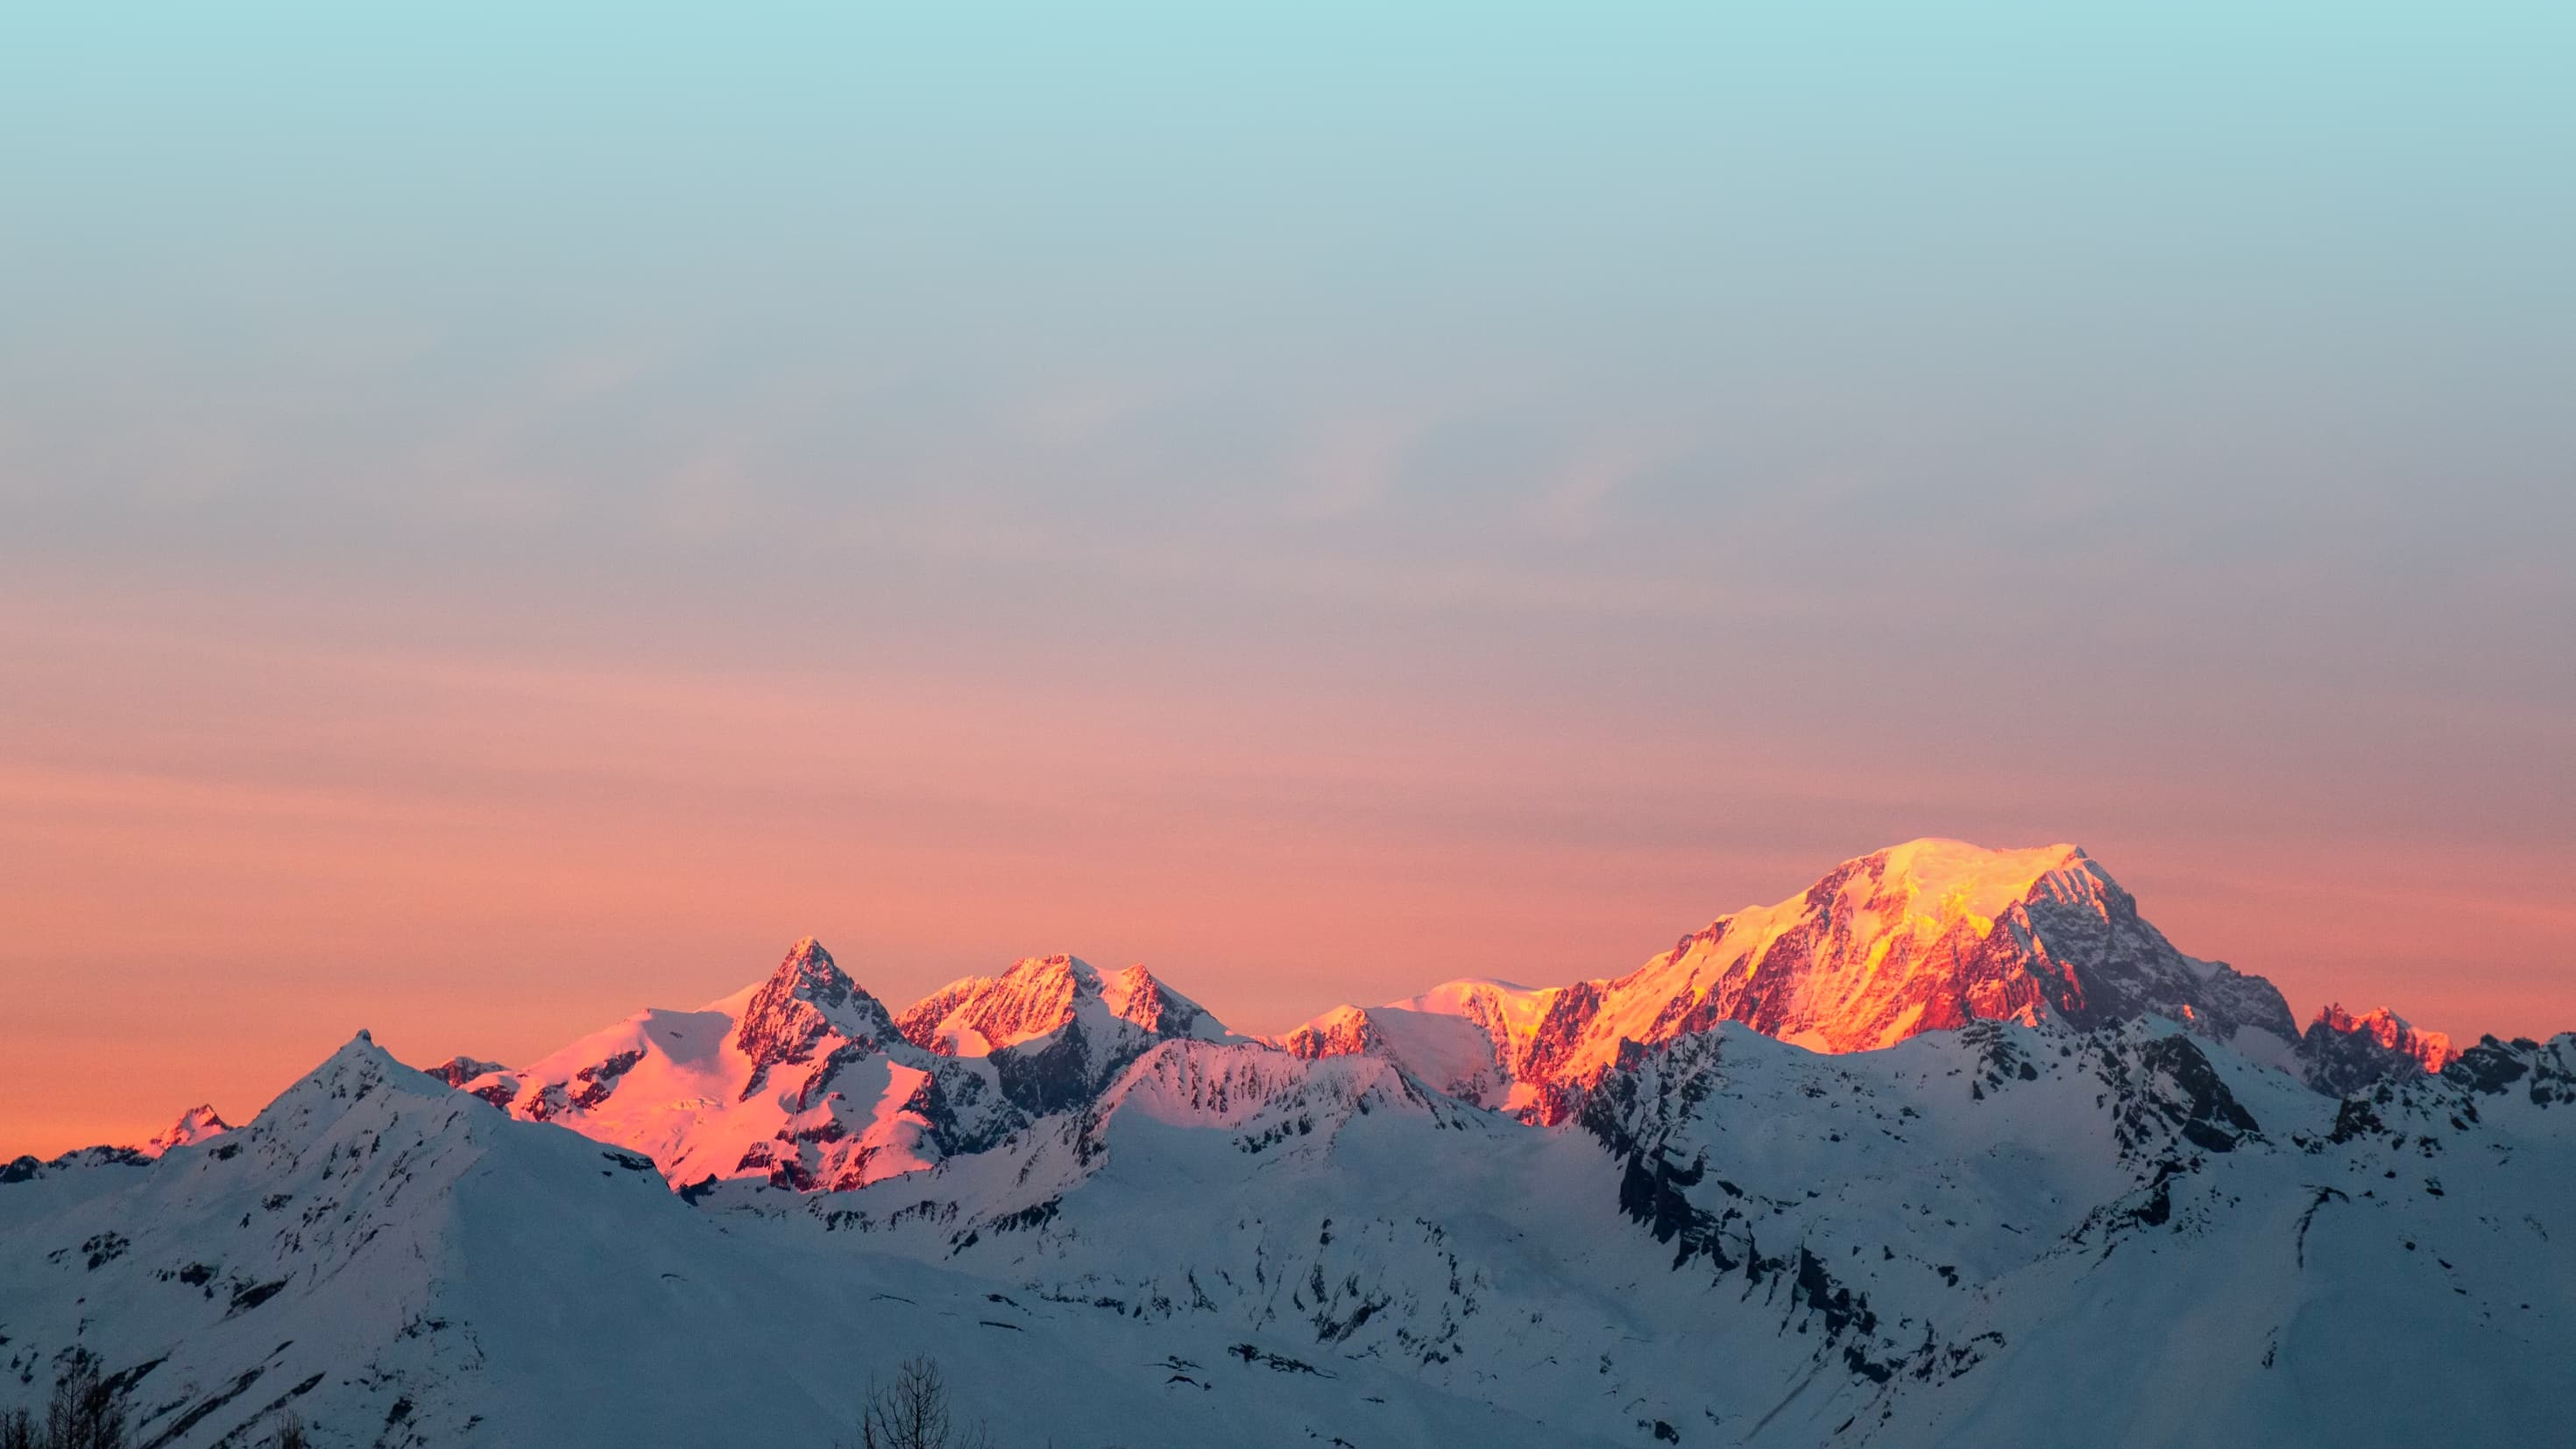 A mountain range with a sunrise, coming from behind the camera, reflecting off them.